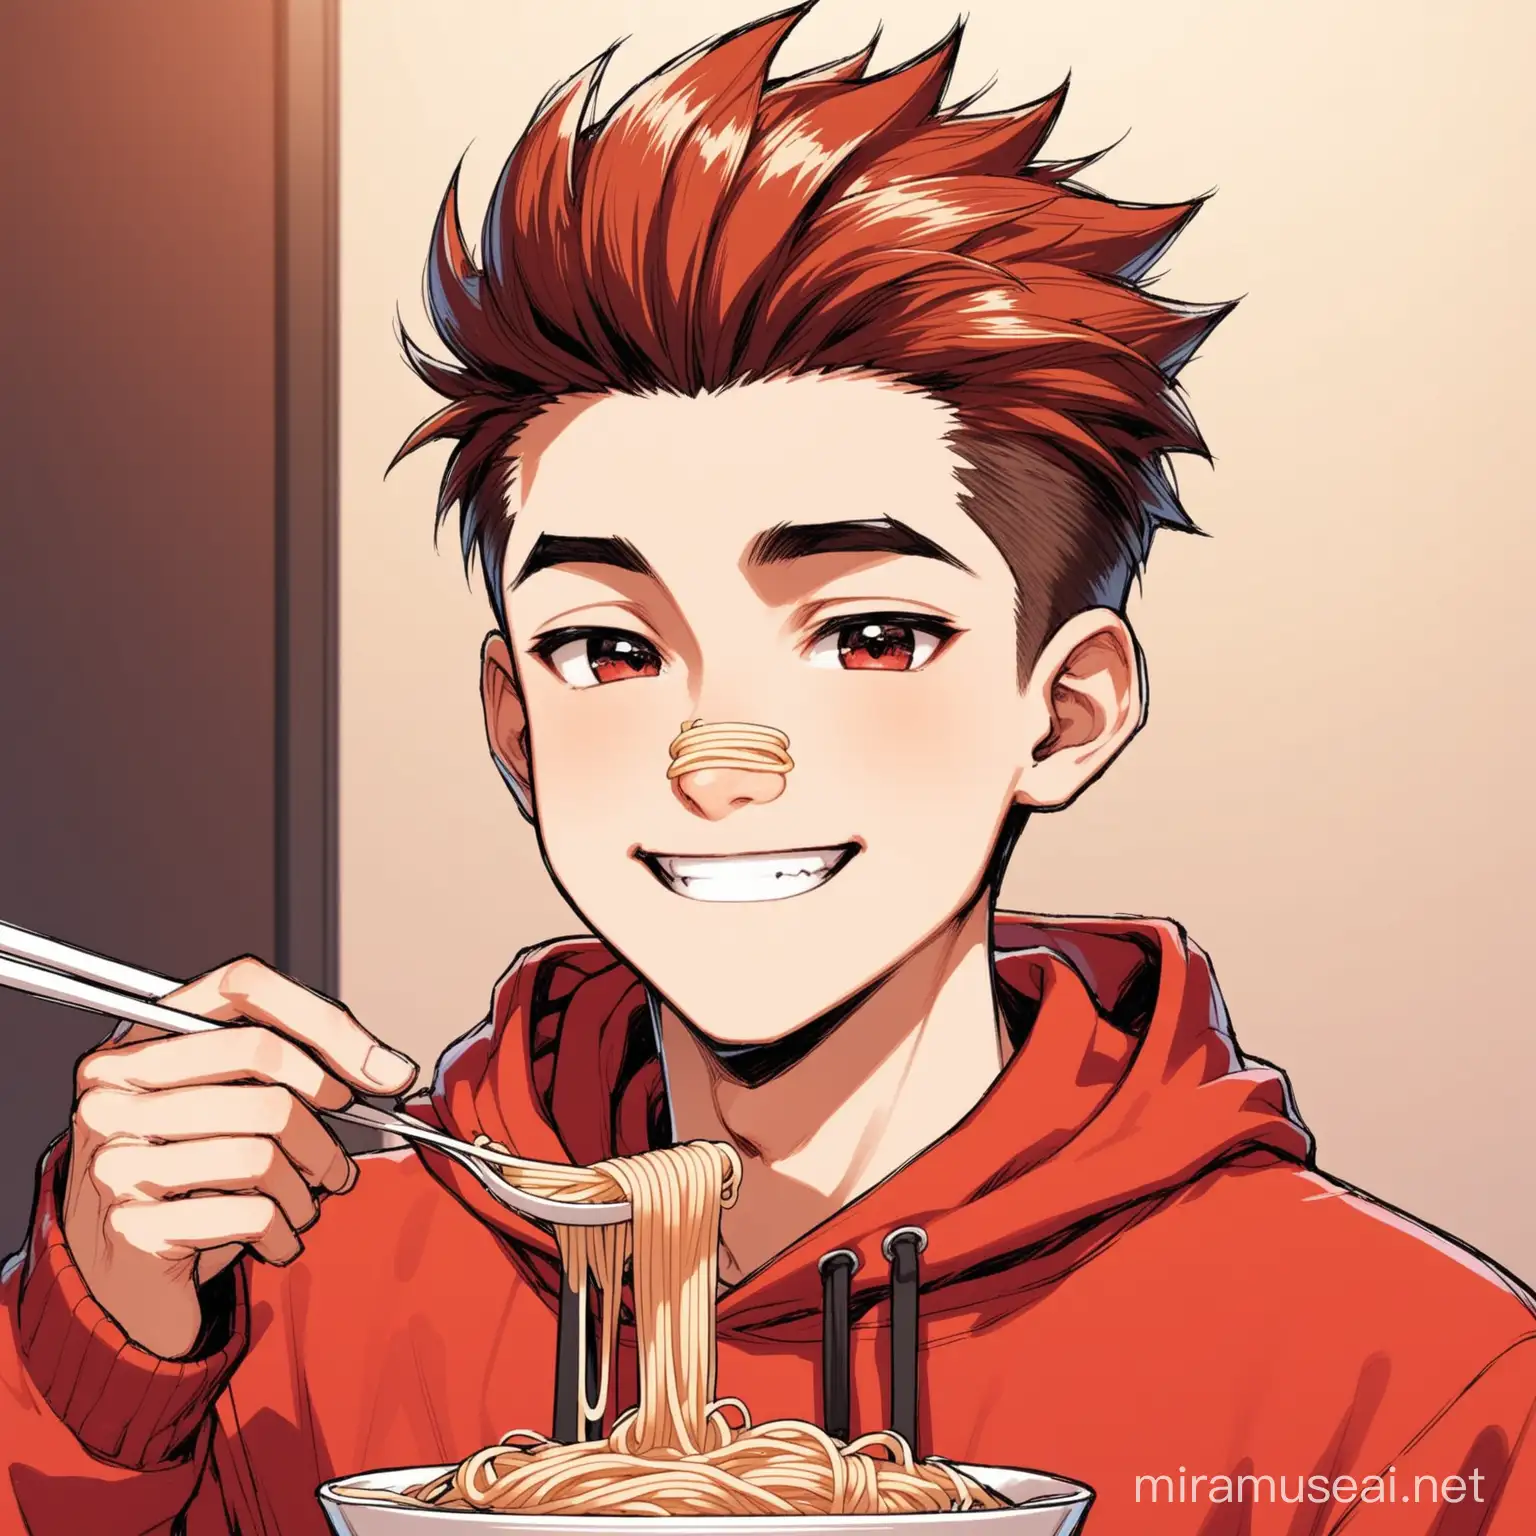 Stylish Hacker Enjoying Noodles in a Red Hoodie